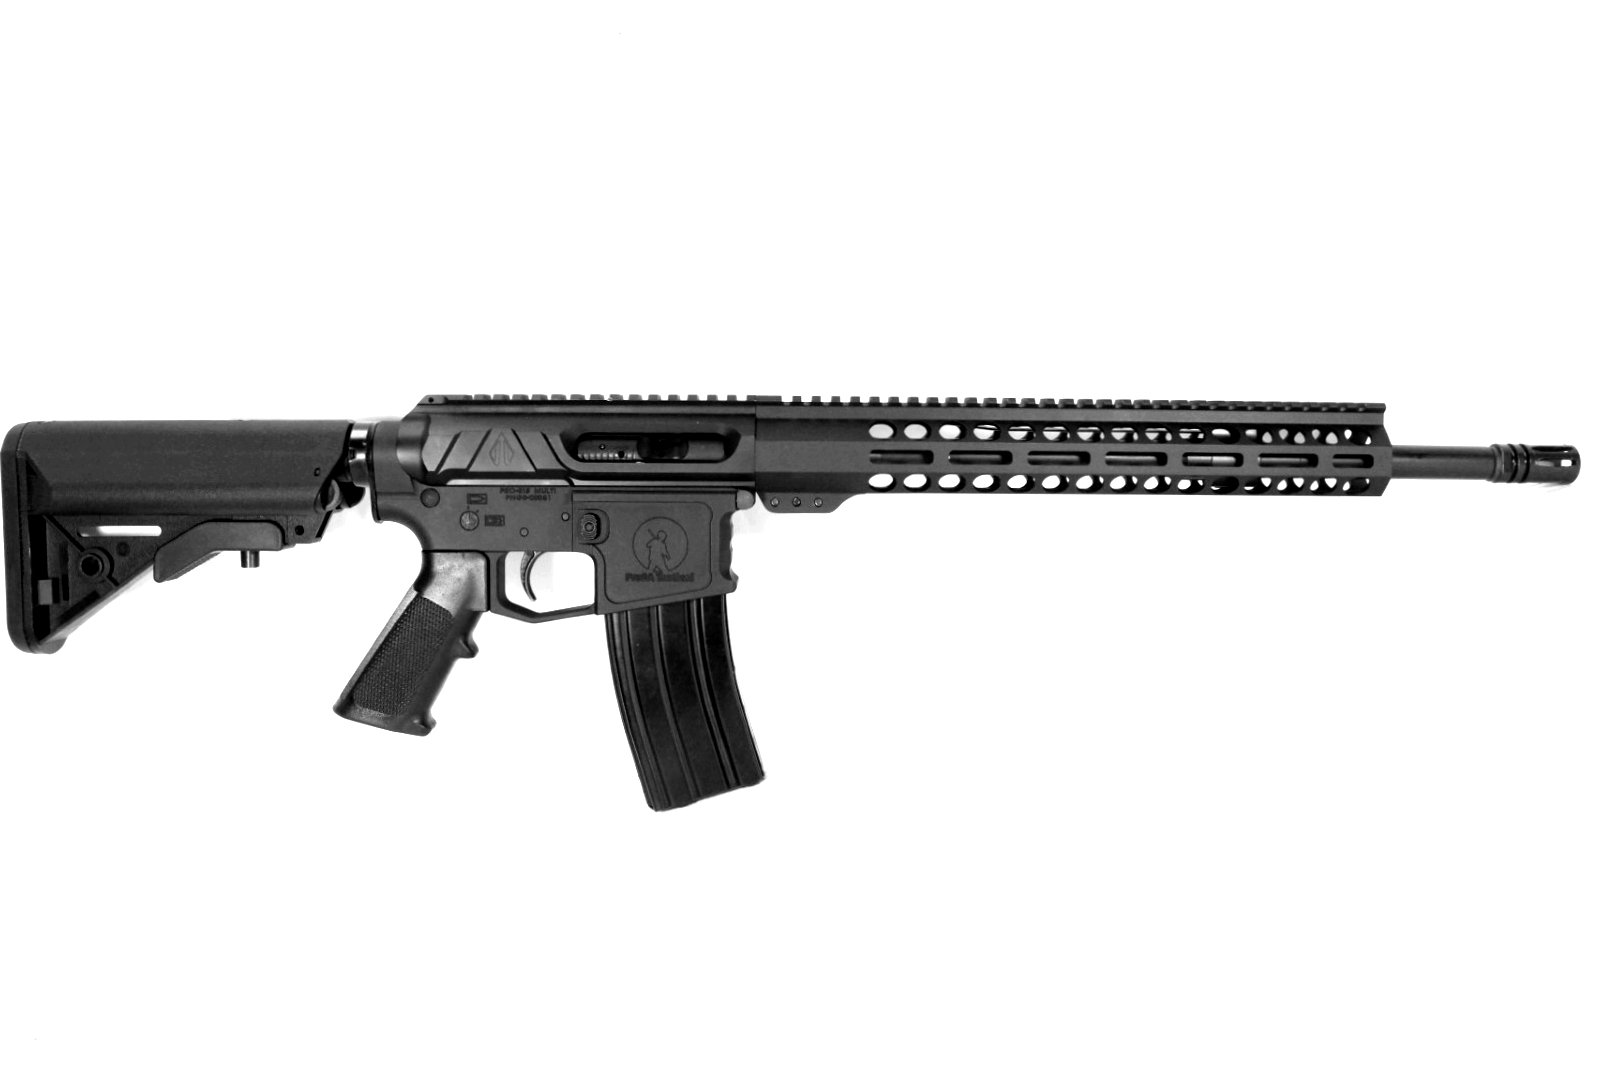 16 inch 5.56 NATO AR-15 Complete Side Charging Rifle | Lifetime Warranty